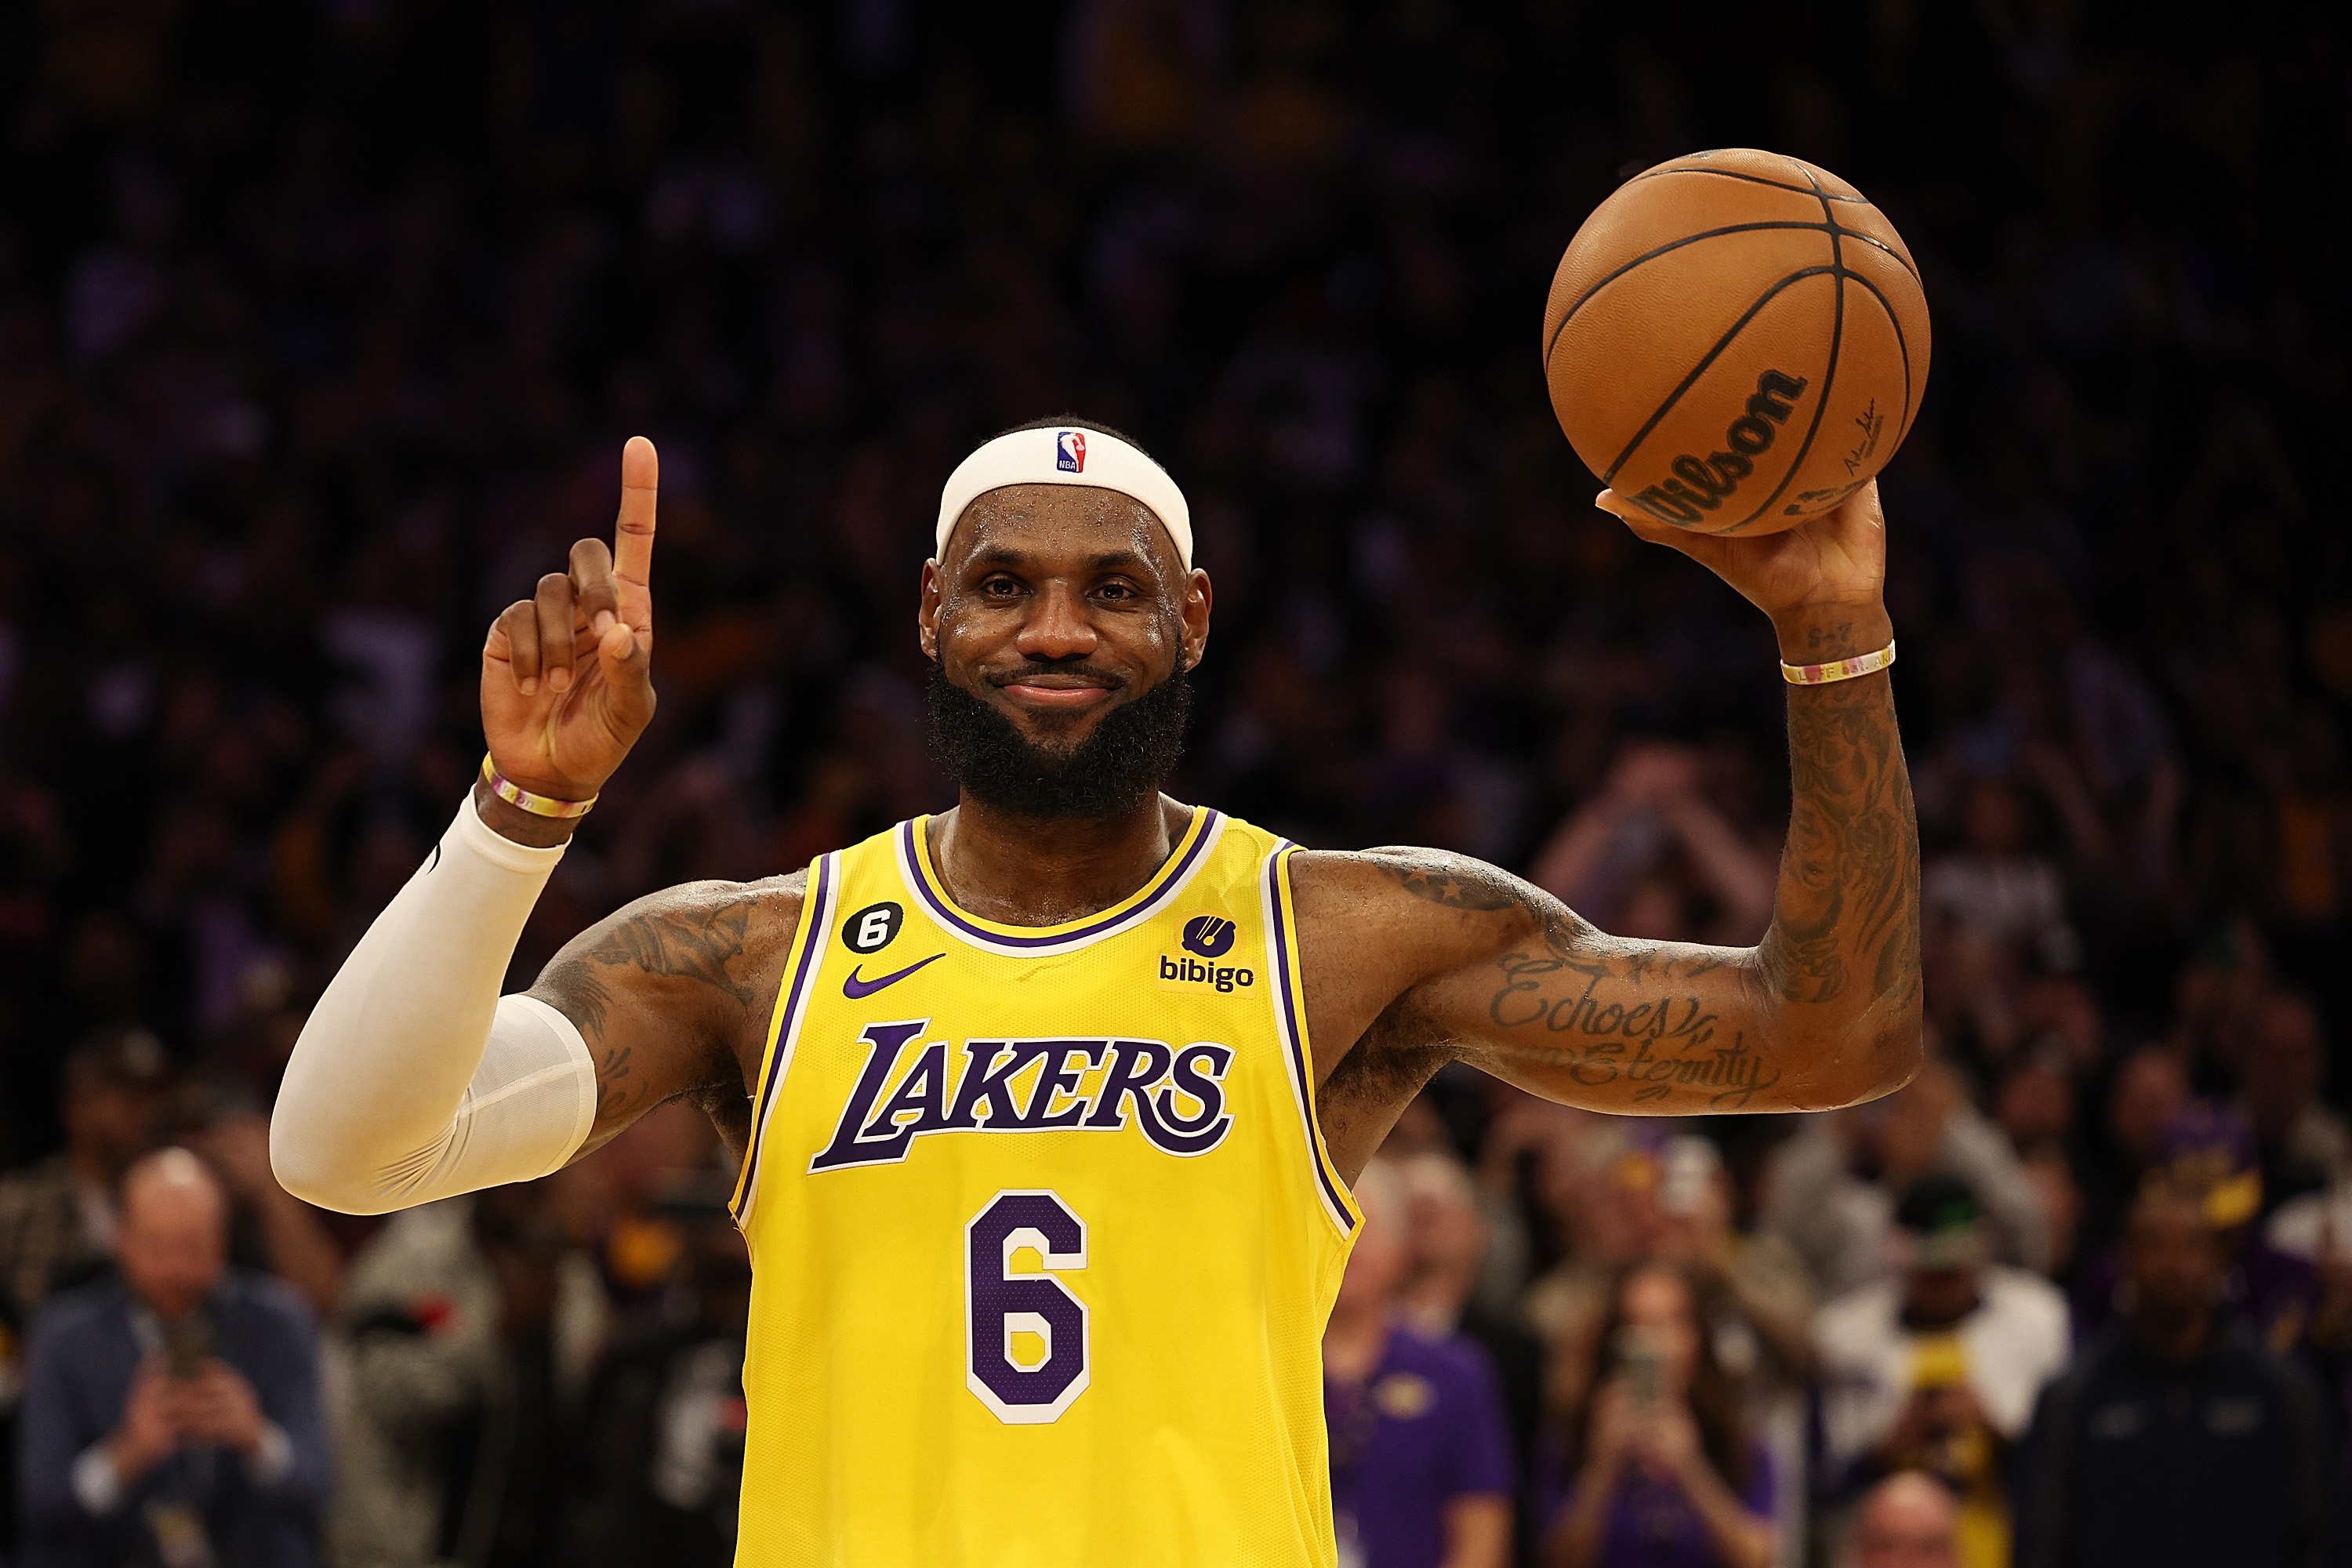 LeBron James reacts after scoring to surpass Kareem Abdul-Jabbar's career total of 38,387 points, becoming the NBA's all-time leading scorer on February 7, 2023 in Los Angeles, California | Source: Getty Images